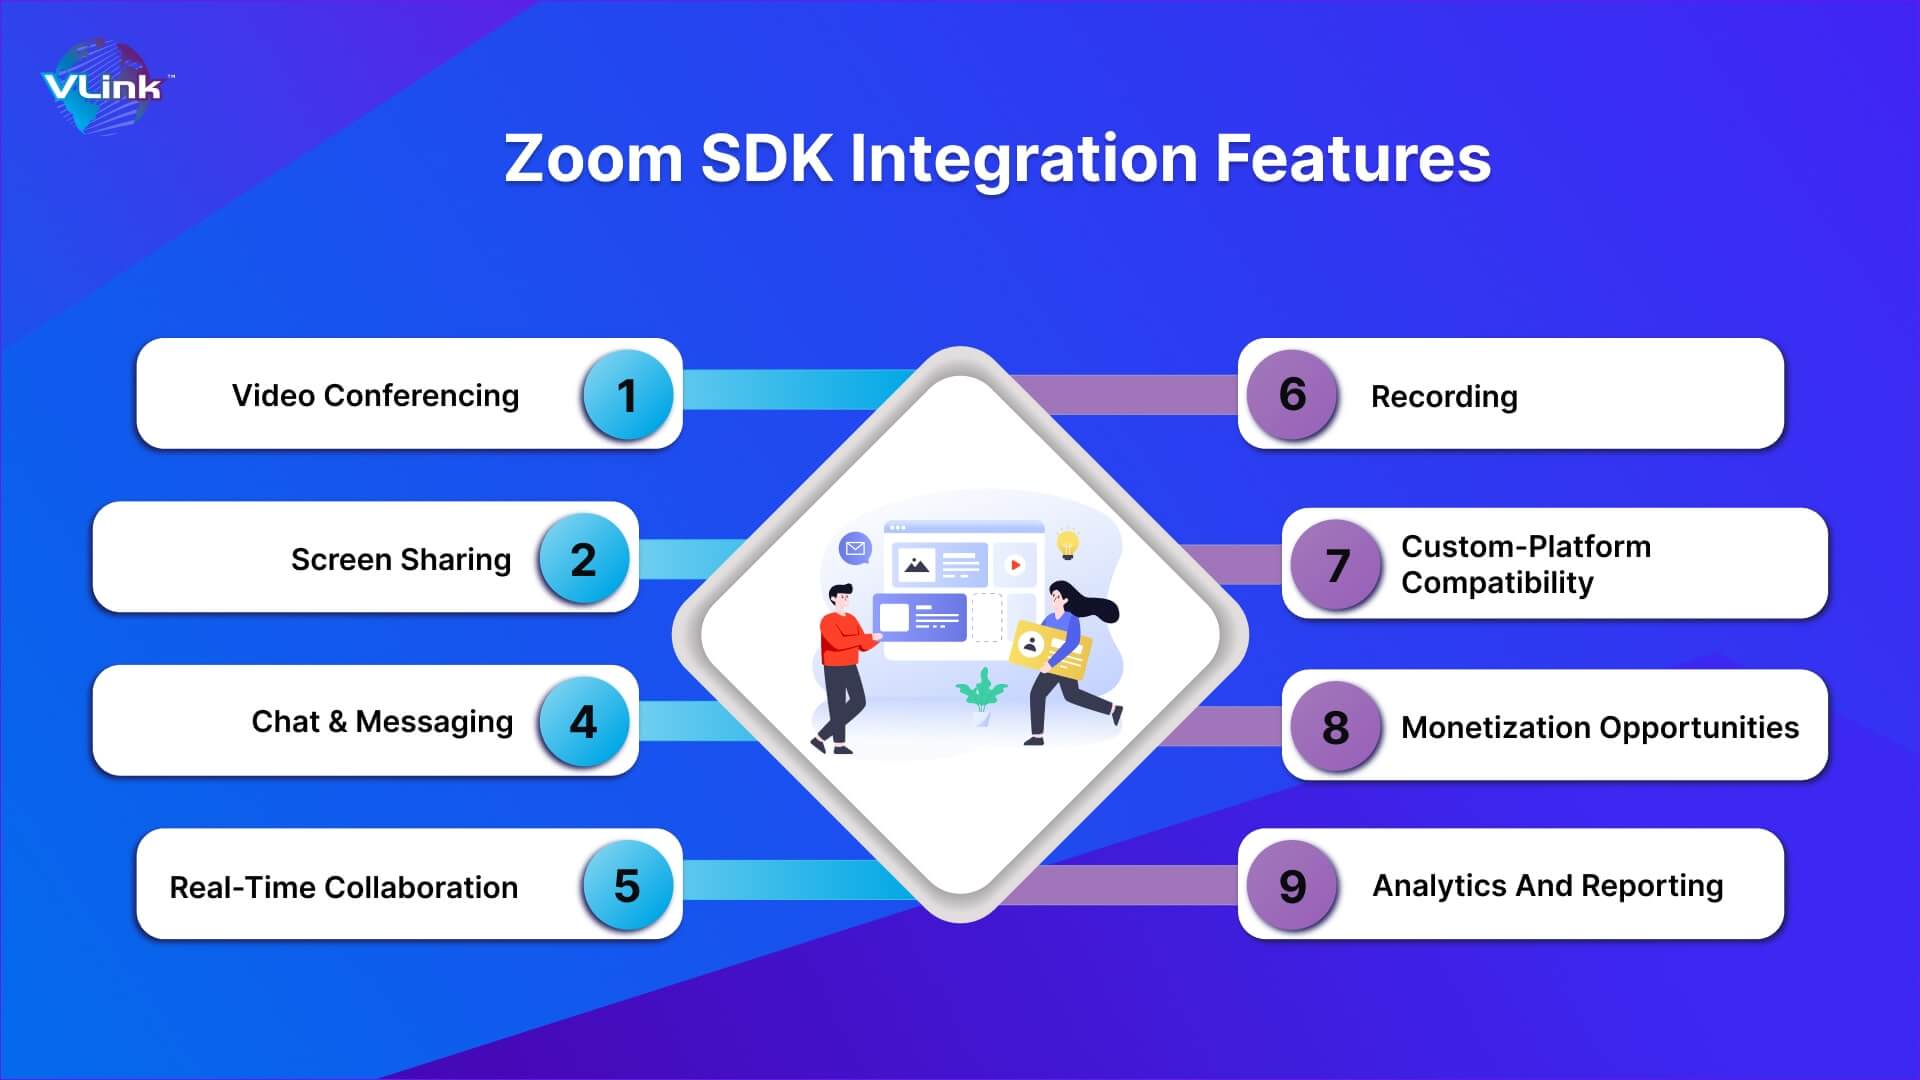 Zoom's SDK enables several features